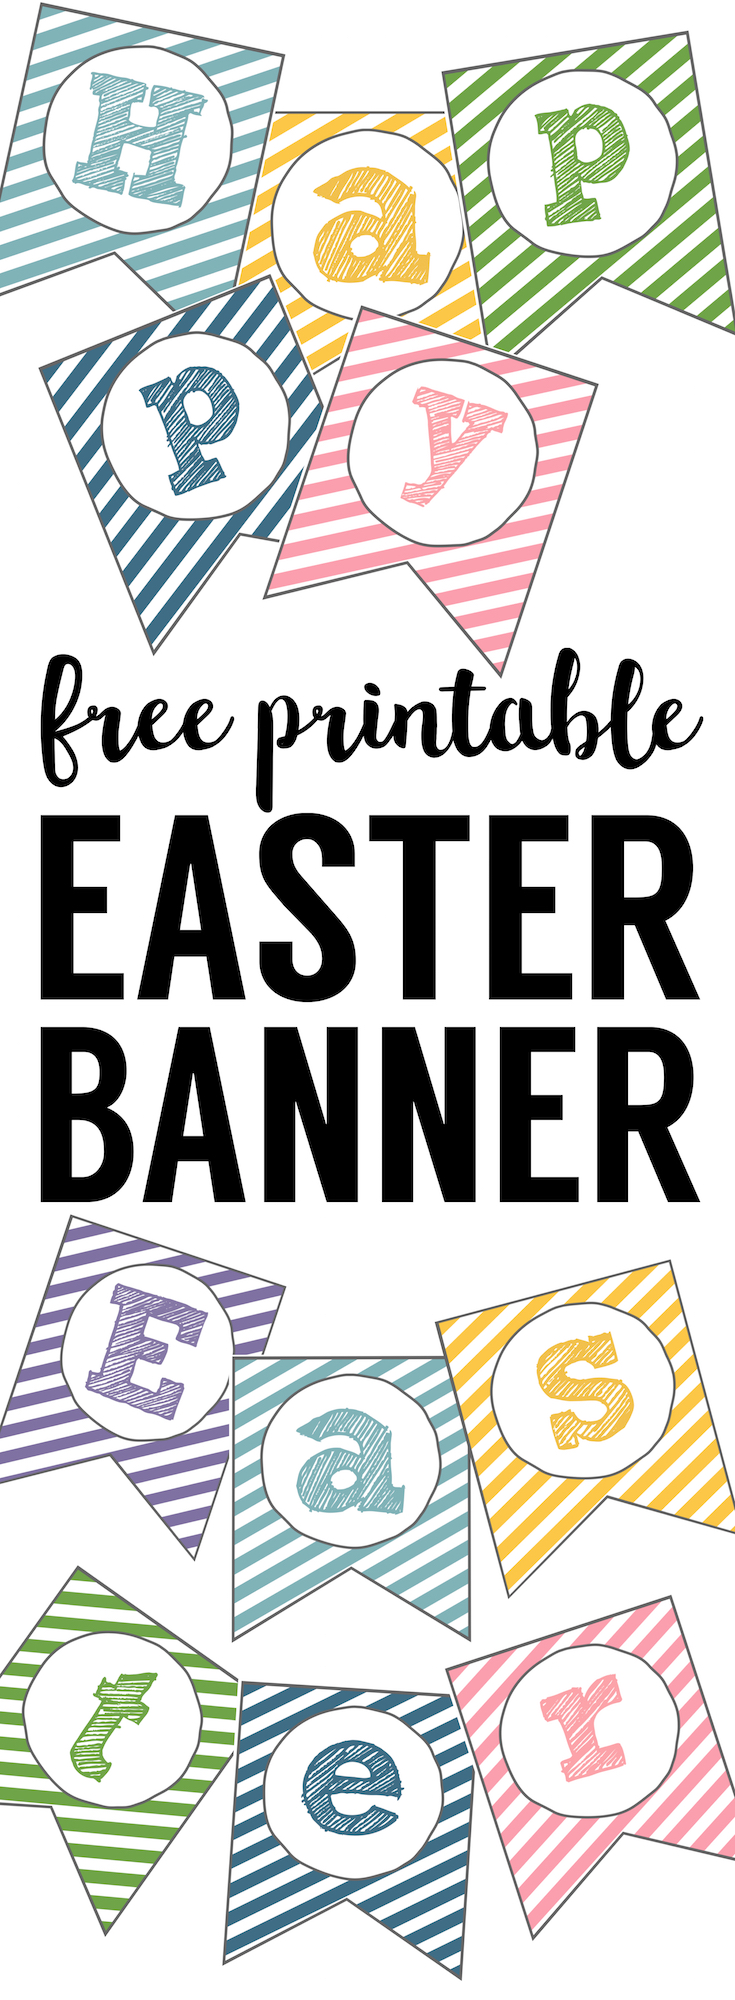 Easter Banner Free Printable. This Happy Easter Sign Printable is an easy DIY for church Easter egg hunt decor or Easter dinner decorations.